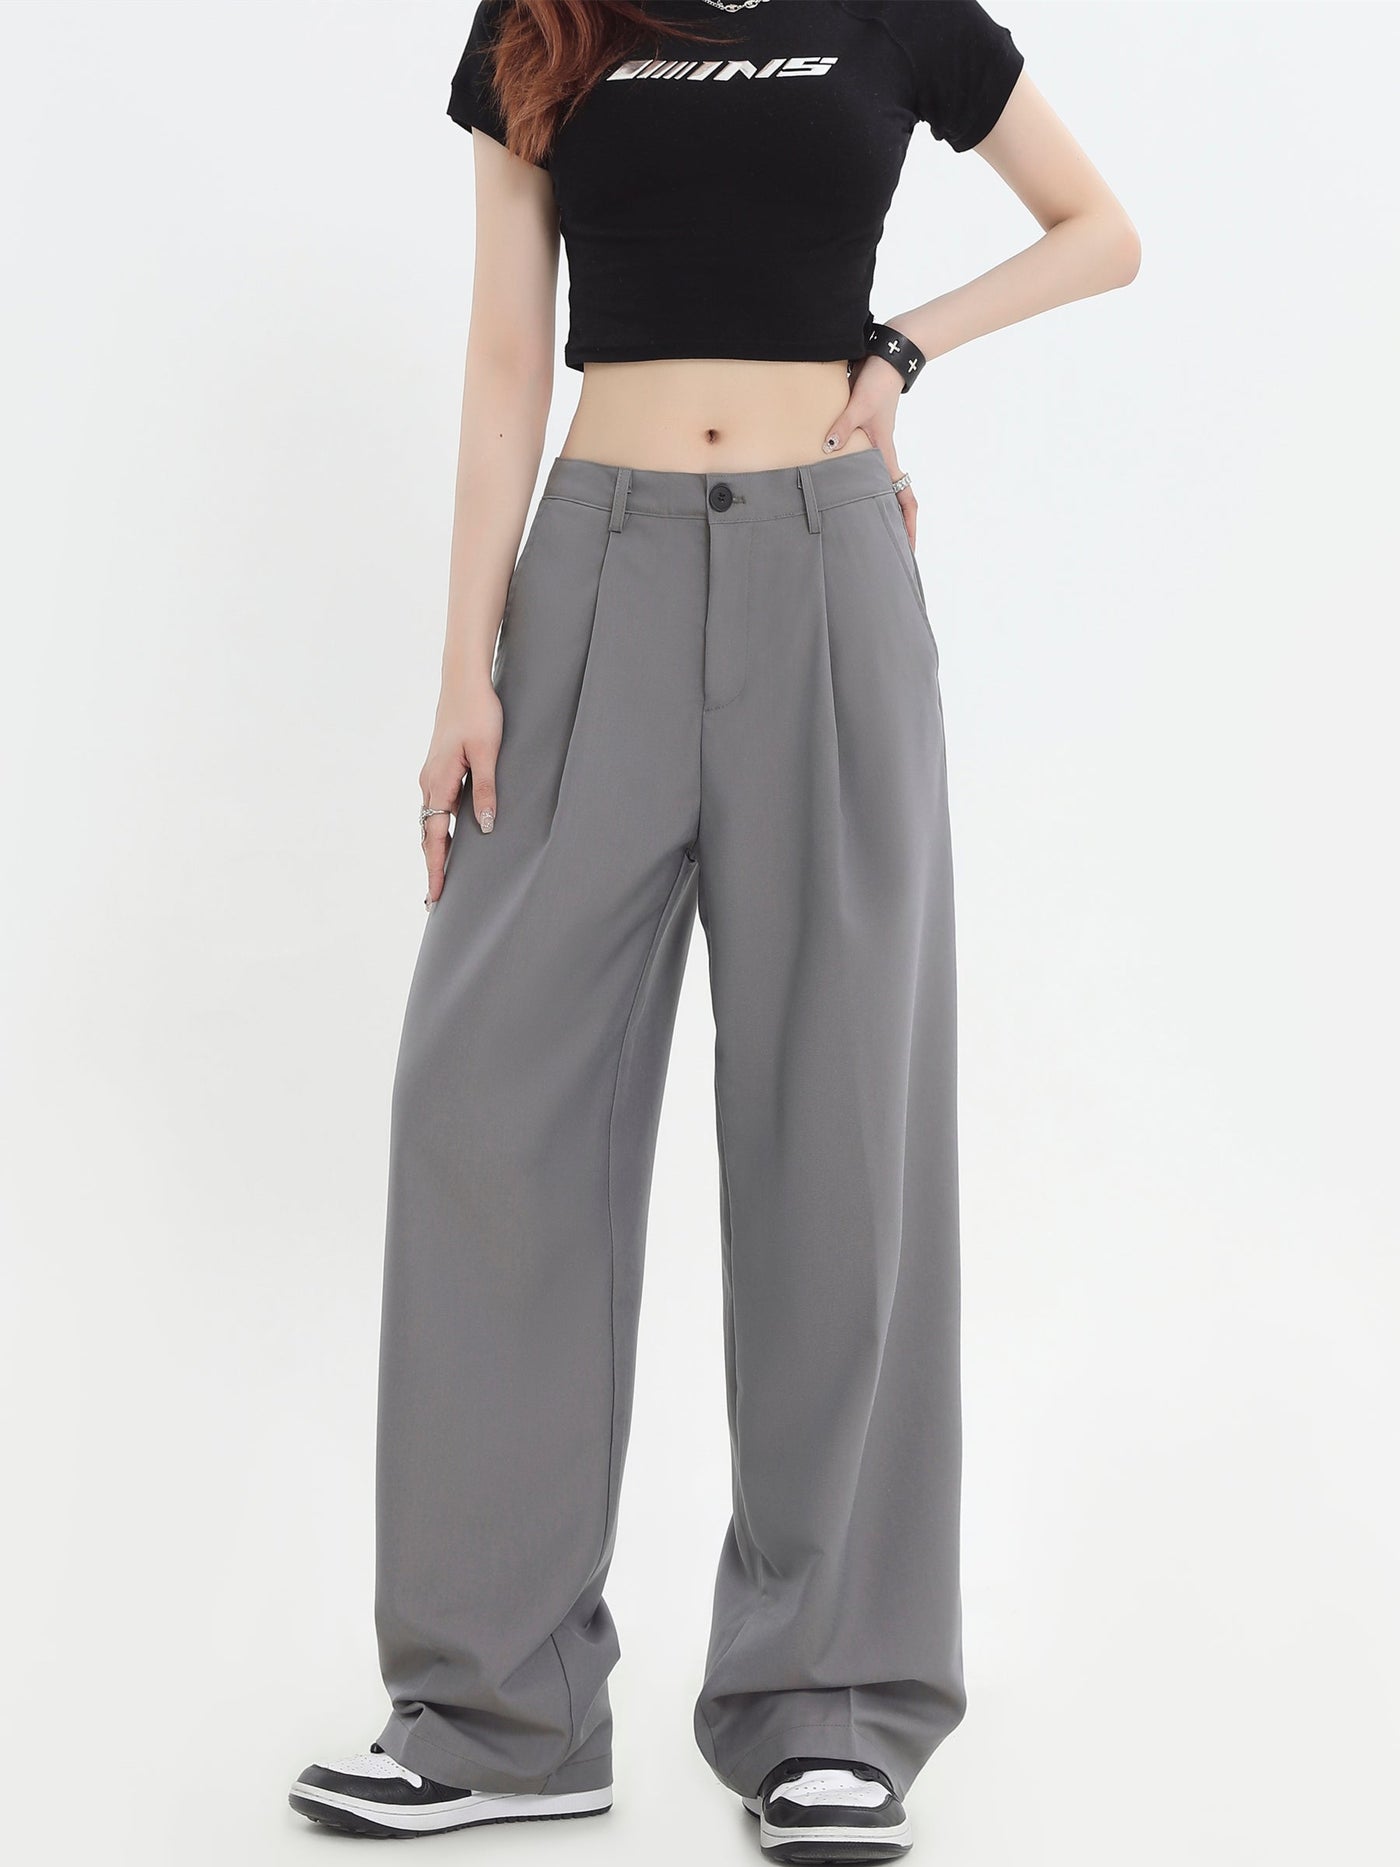 Fold Pleated Loose Trousers Korean Street Fashion Pants By INS Korea Shop Online at OH Vault